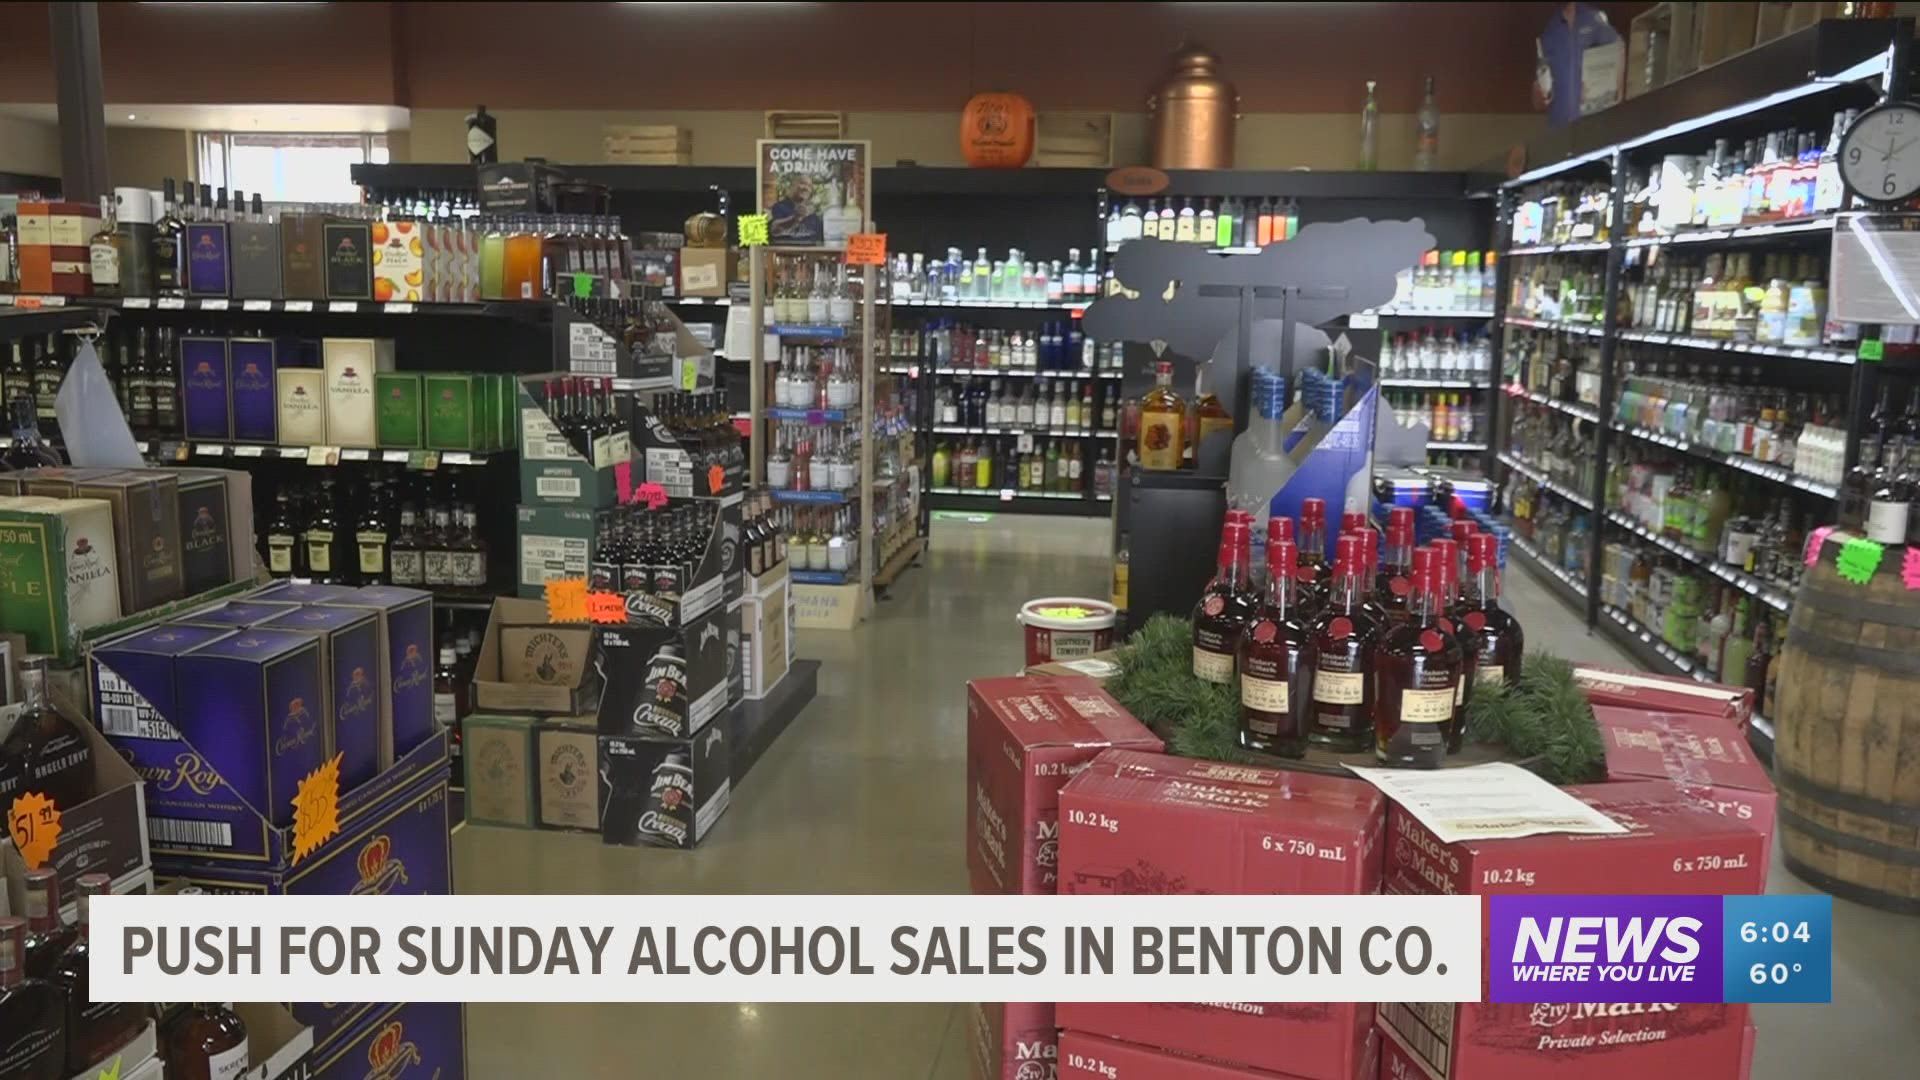 A committee is working to gather signatures to add the Bentonville and Rogers Sunday alcohol sales issue to the general election ballot in November.